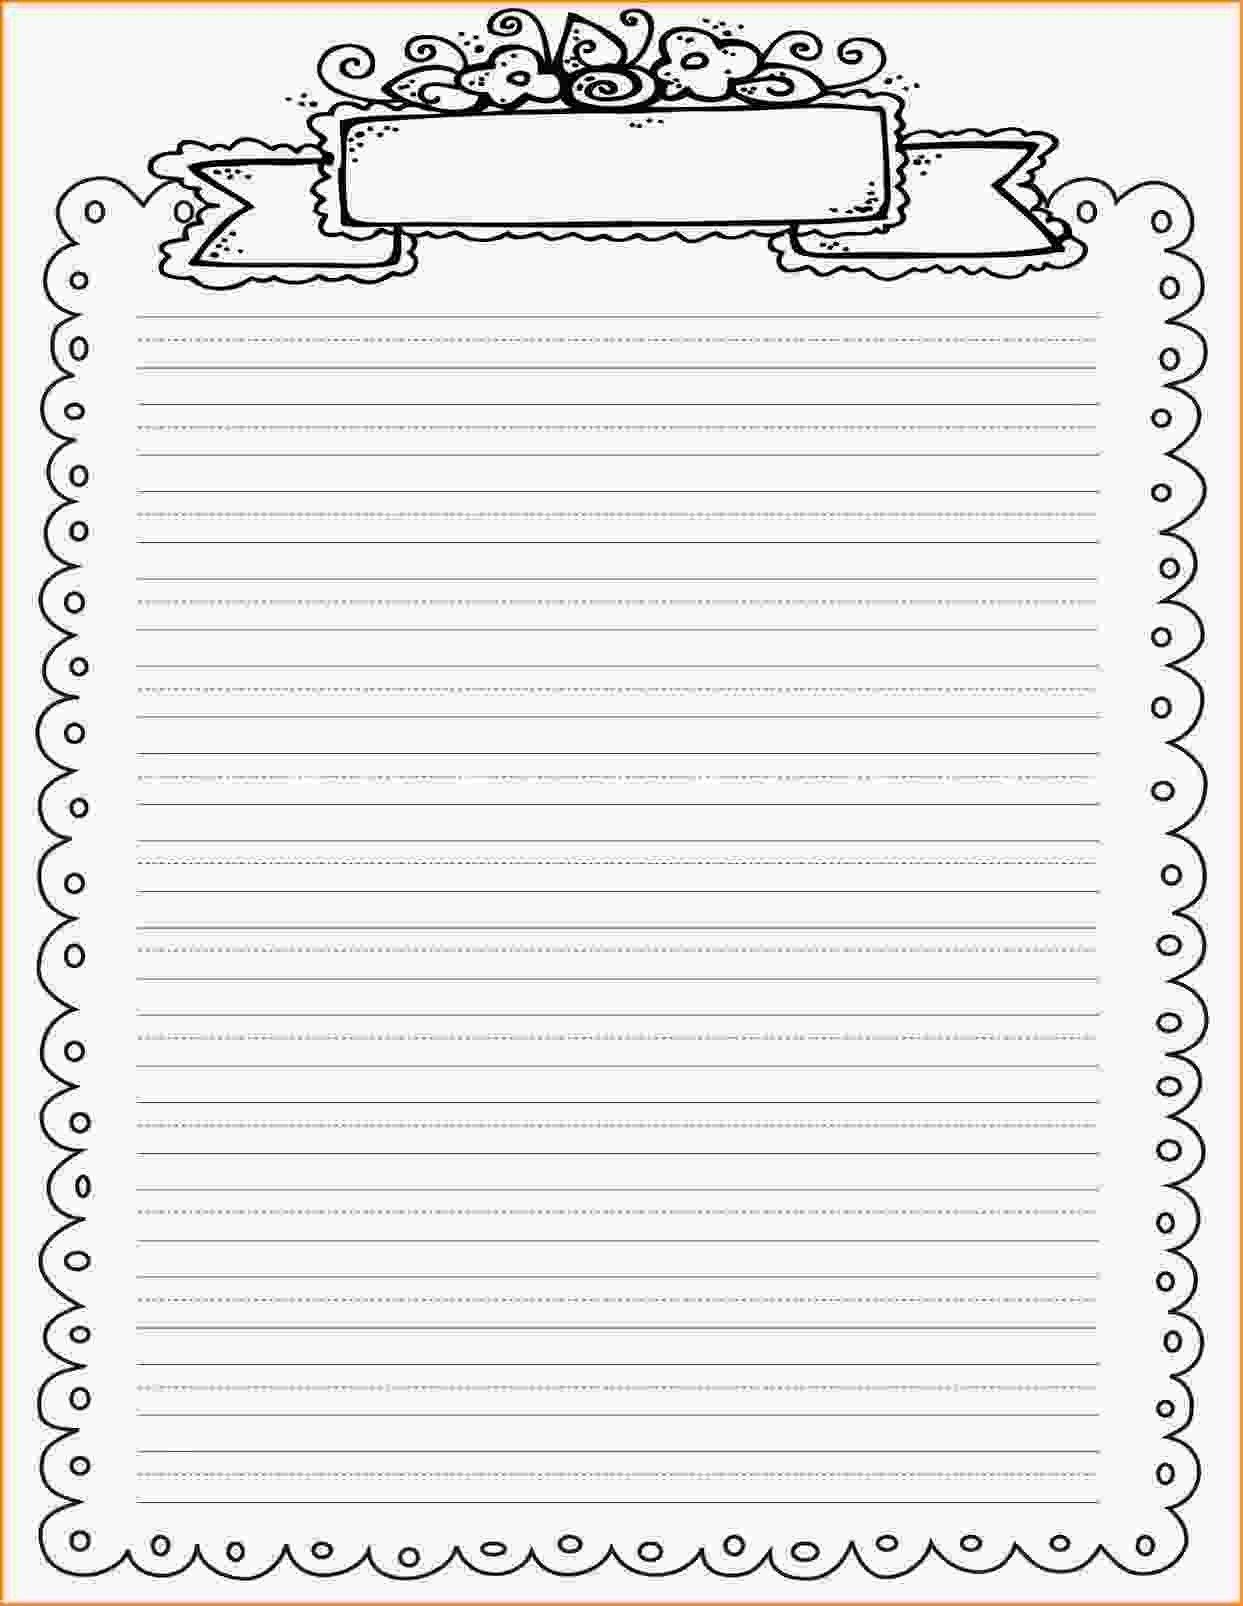 Lined Paper Printable With Border | World Of Printables Regarding - Free Printable Journal Pages Lined